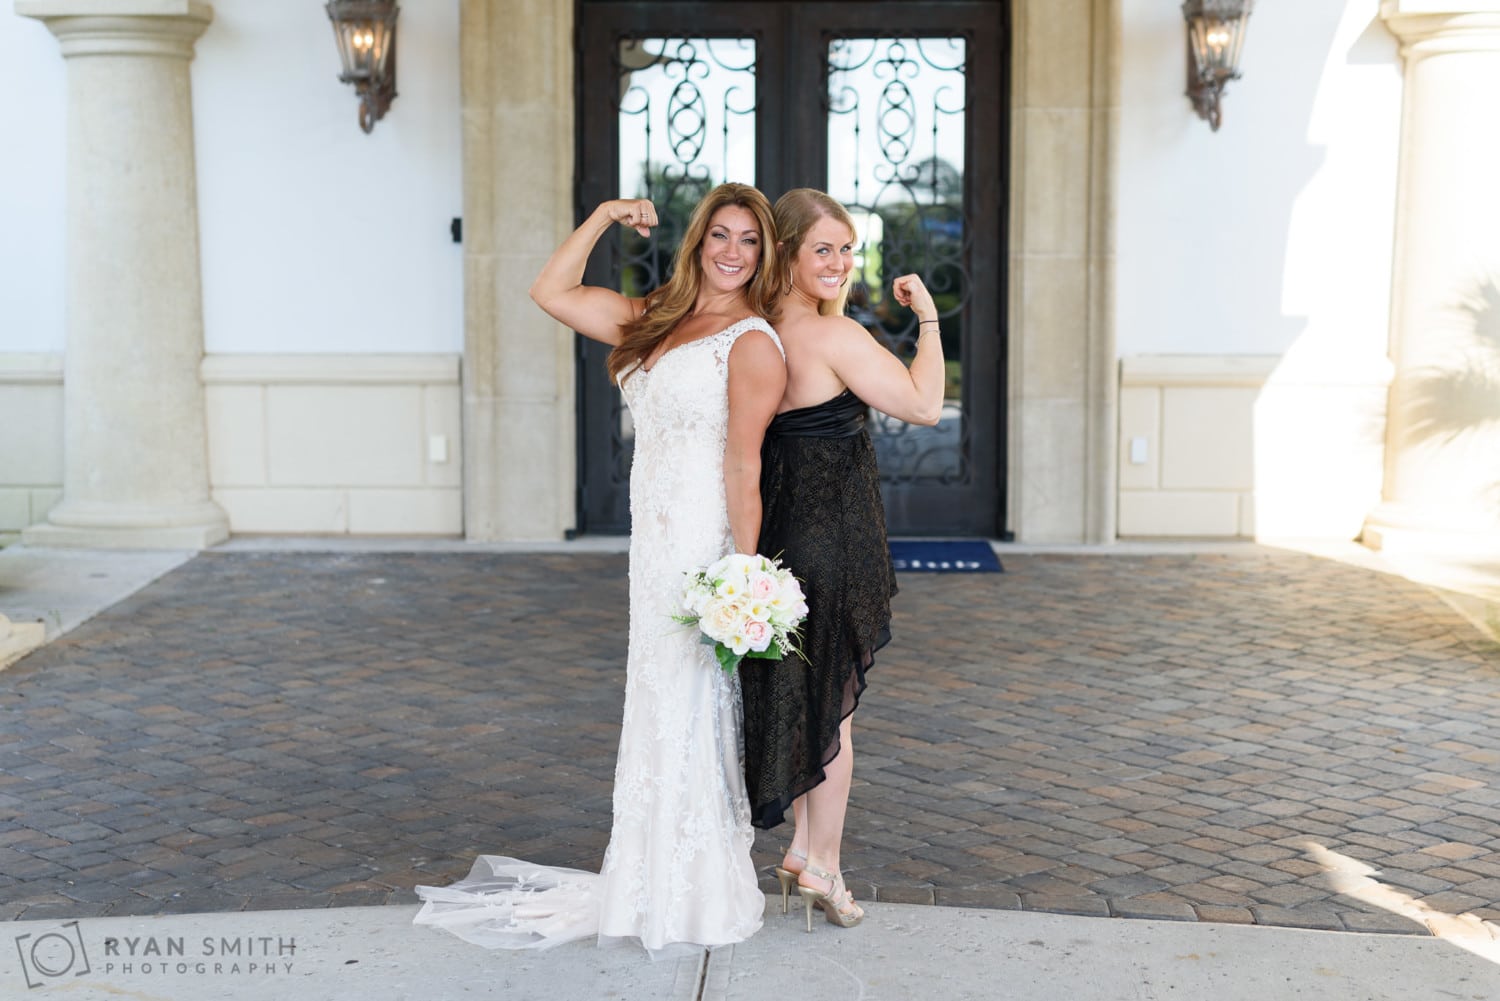 Bride and best friend showing off their muscles - Members Club at Grande Dunes